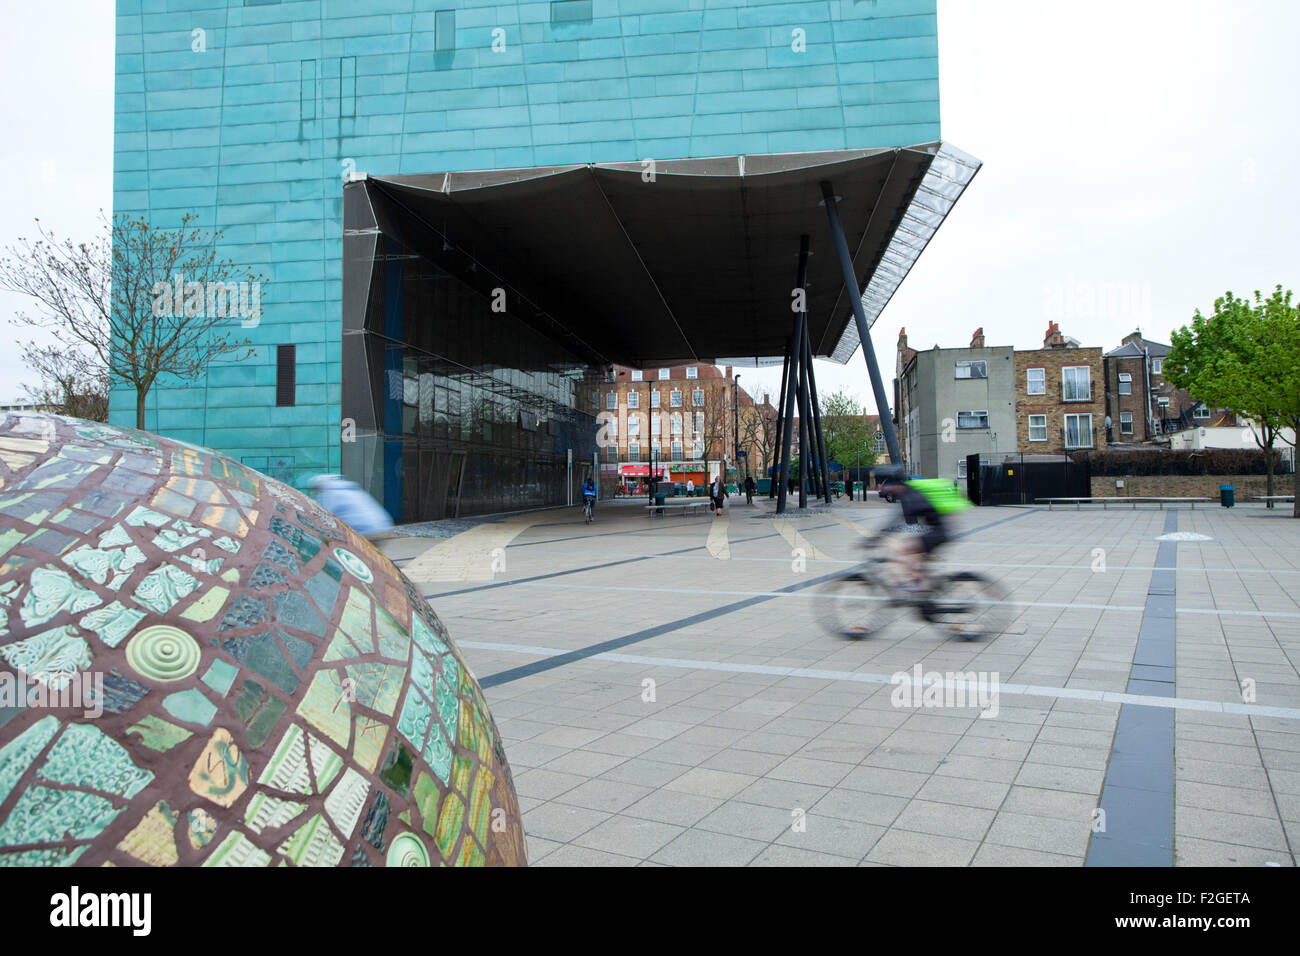 A view of Peckham Square with Peckham library and a cyclist. Stock Photo